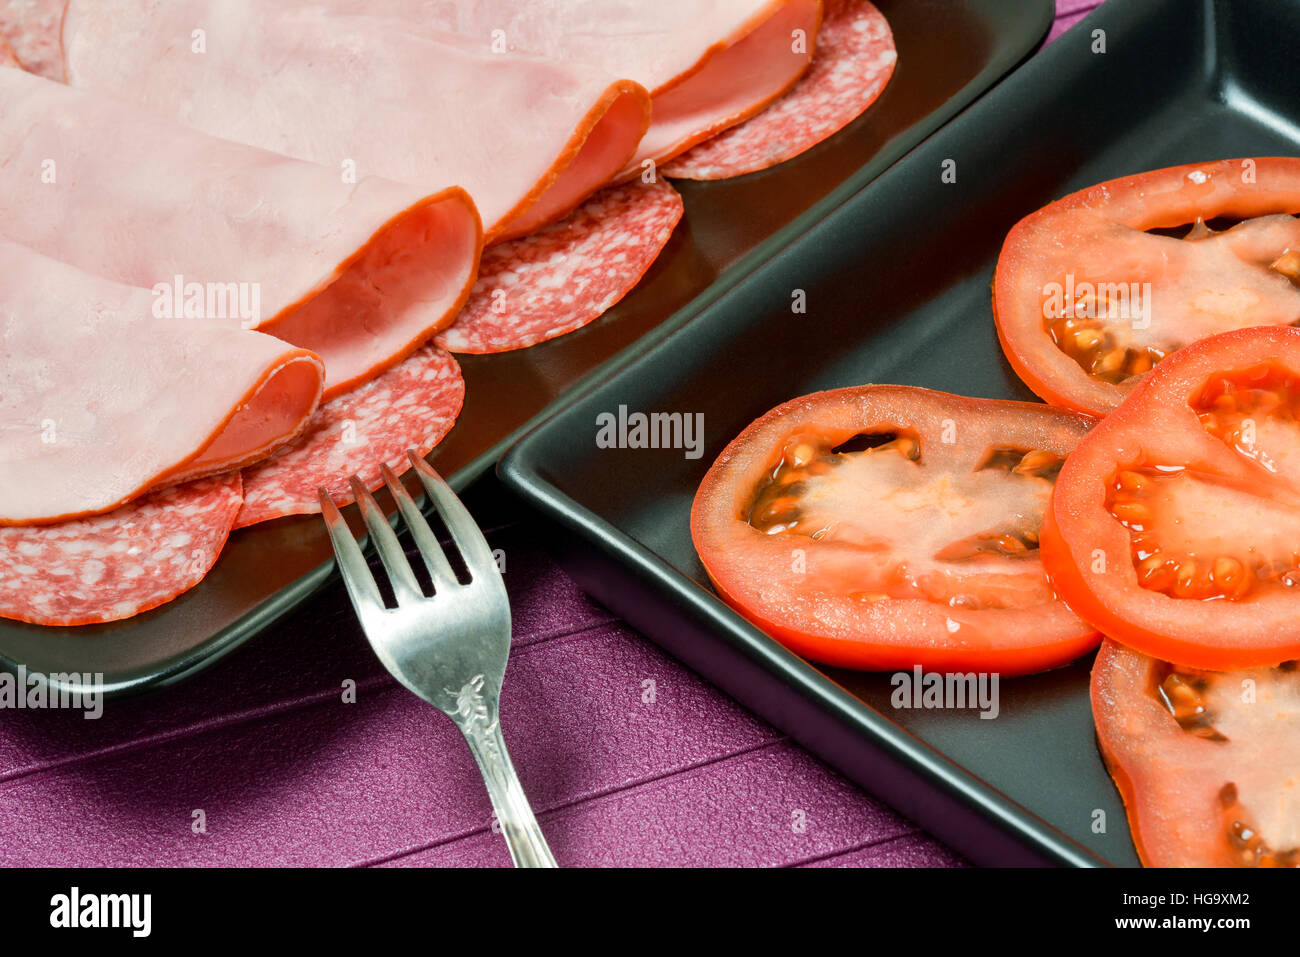 Plates with tomatoes, ham, sausages on the table Stock Photo